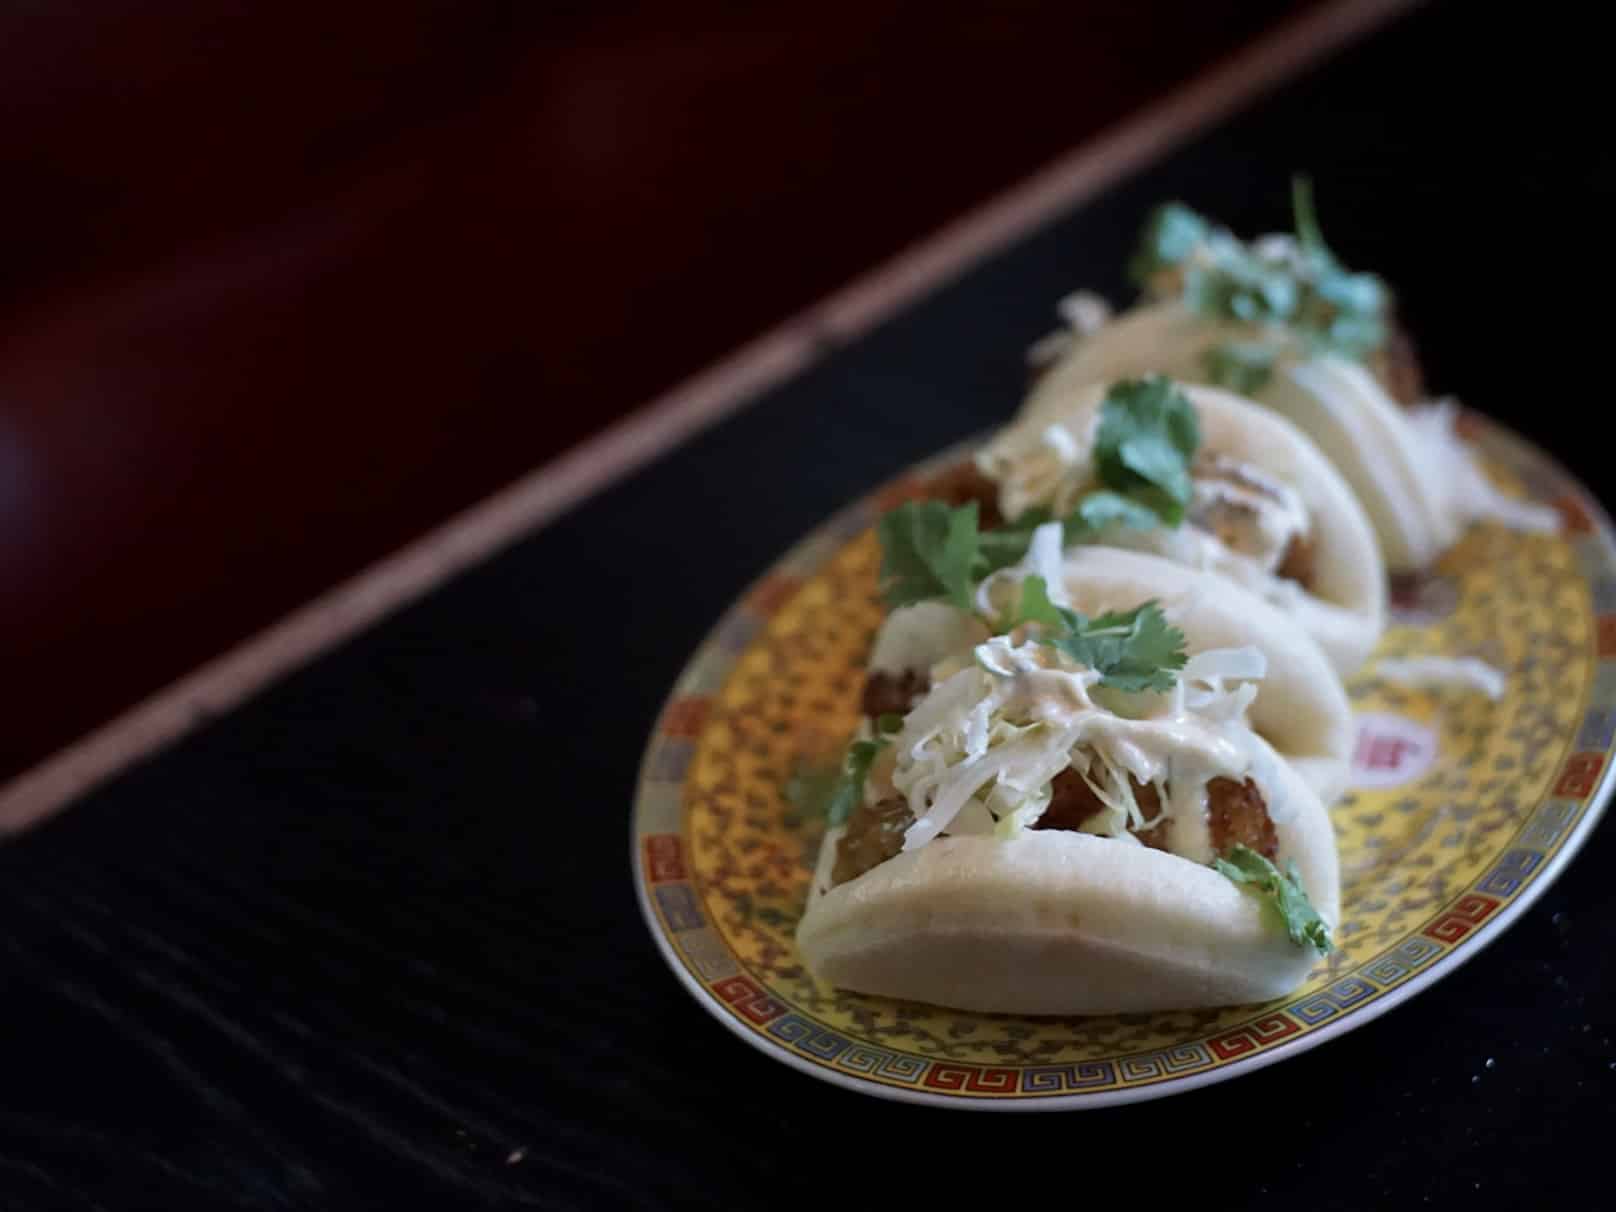 Tomatillo Steam Buns at Old Thousand